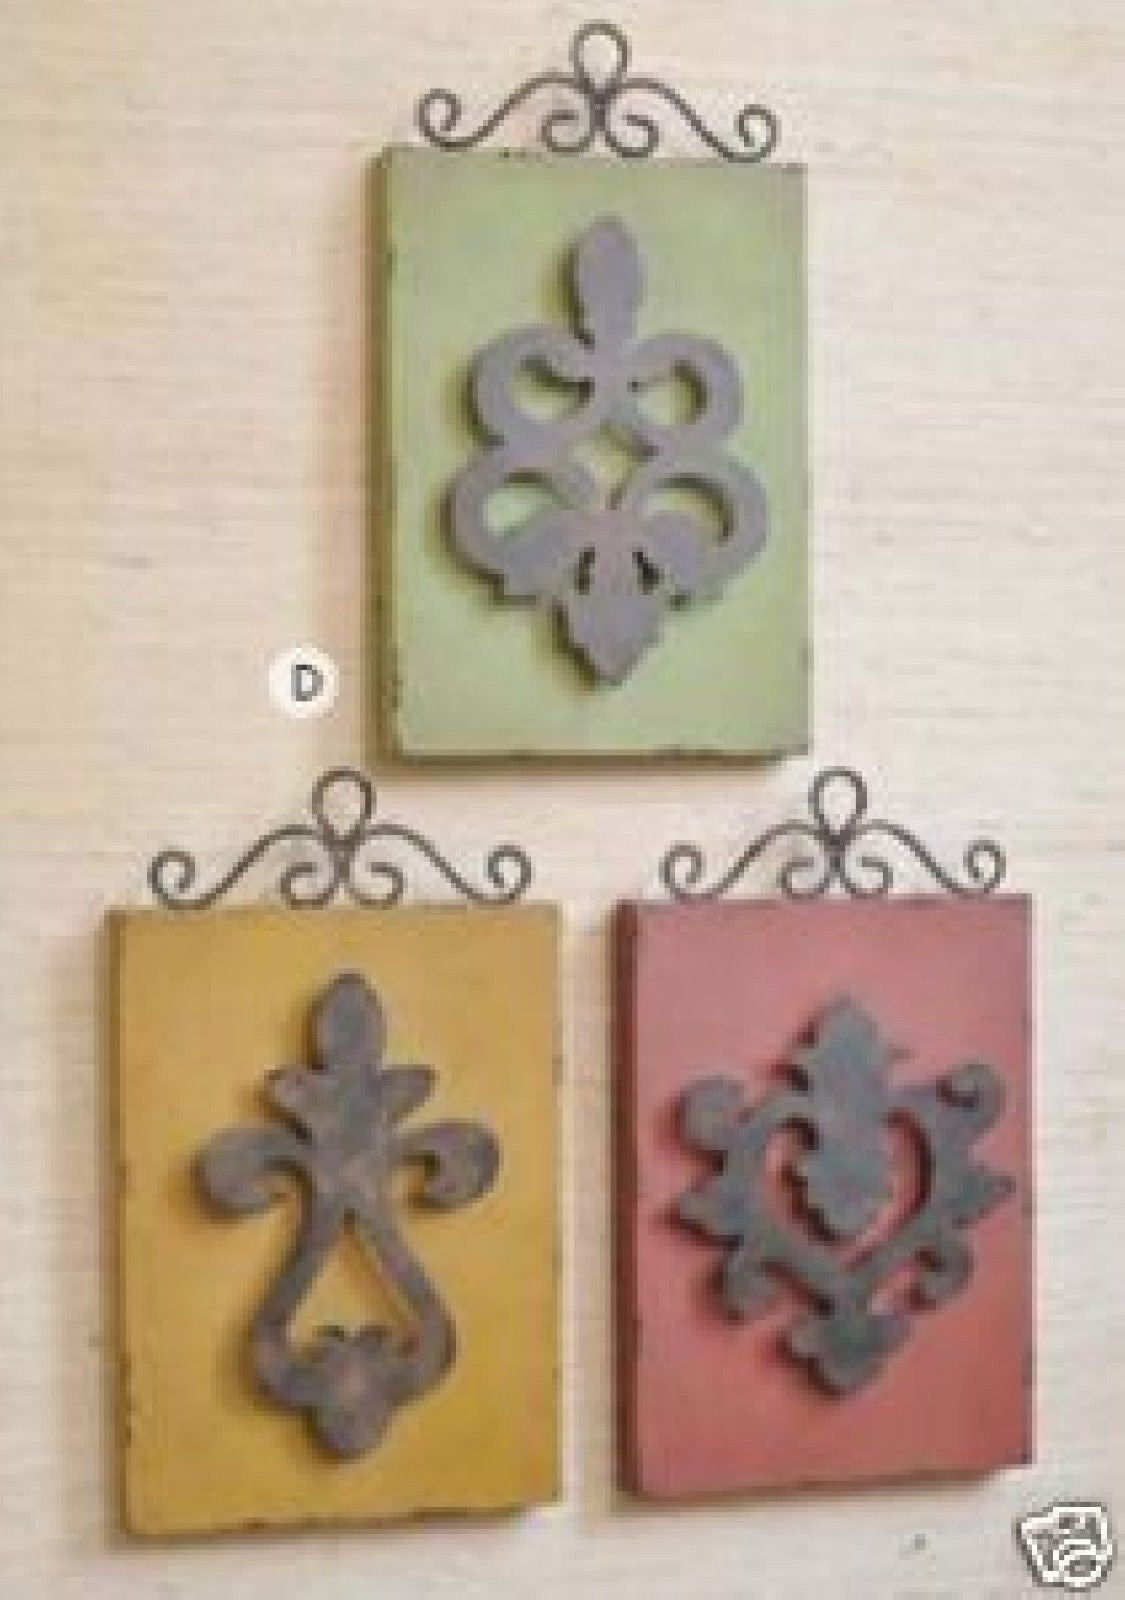 SOUTHERN LIVING AT HOME HERITAGE WALL ART SET OF 3 DECORATIVE PLAQUES - Plastic Glass and Wax ~ PGW